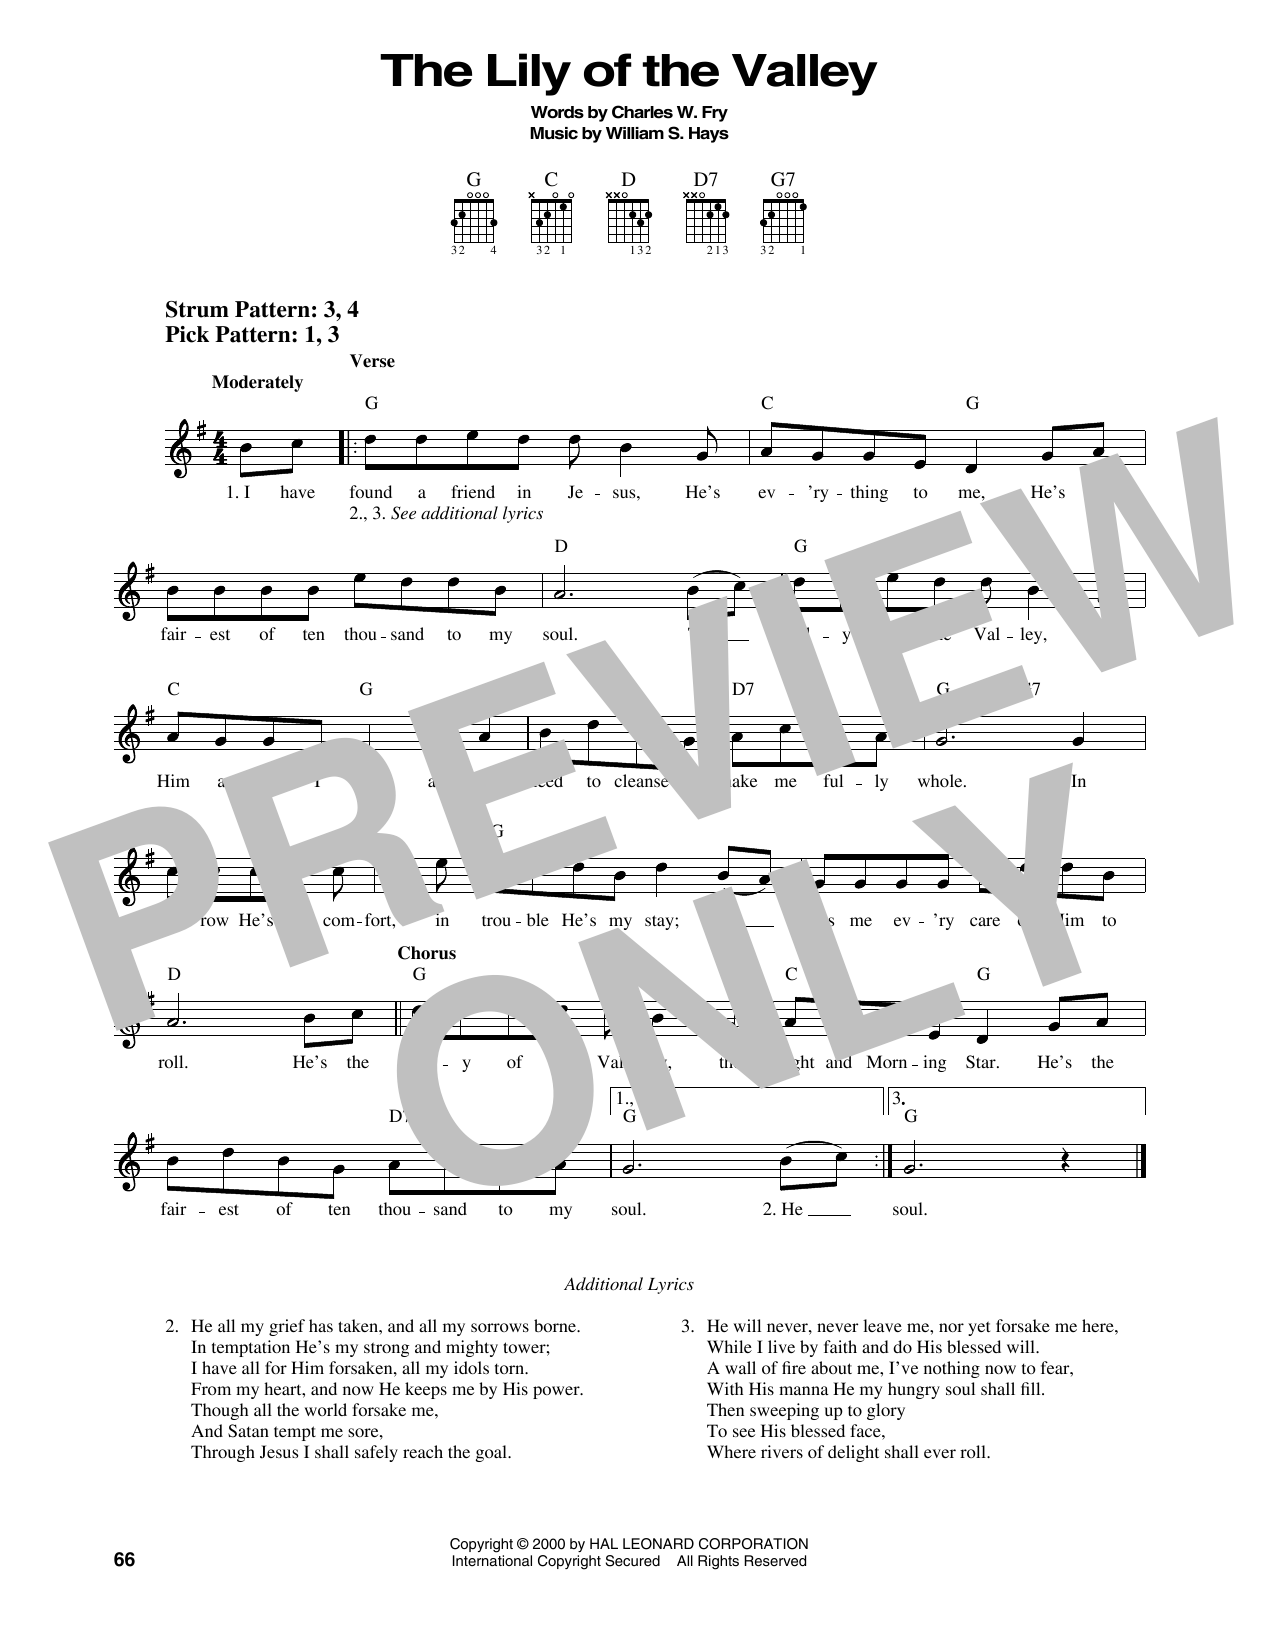 Charles W. Fry The Lily Of The Valley sheet music notes printable PDF score